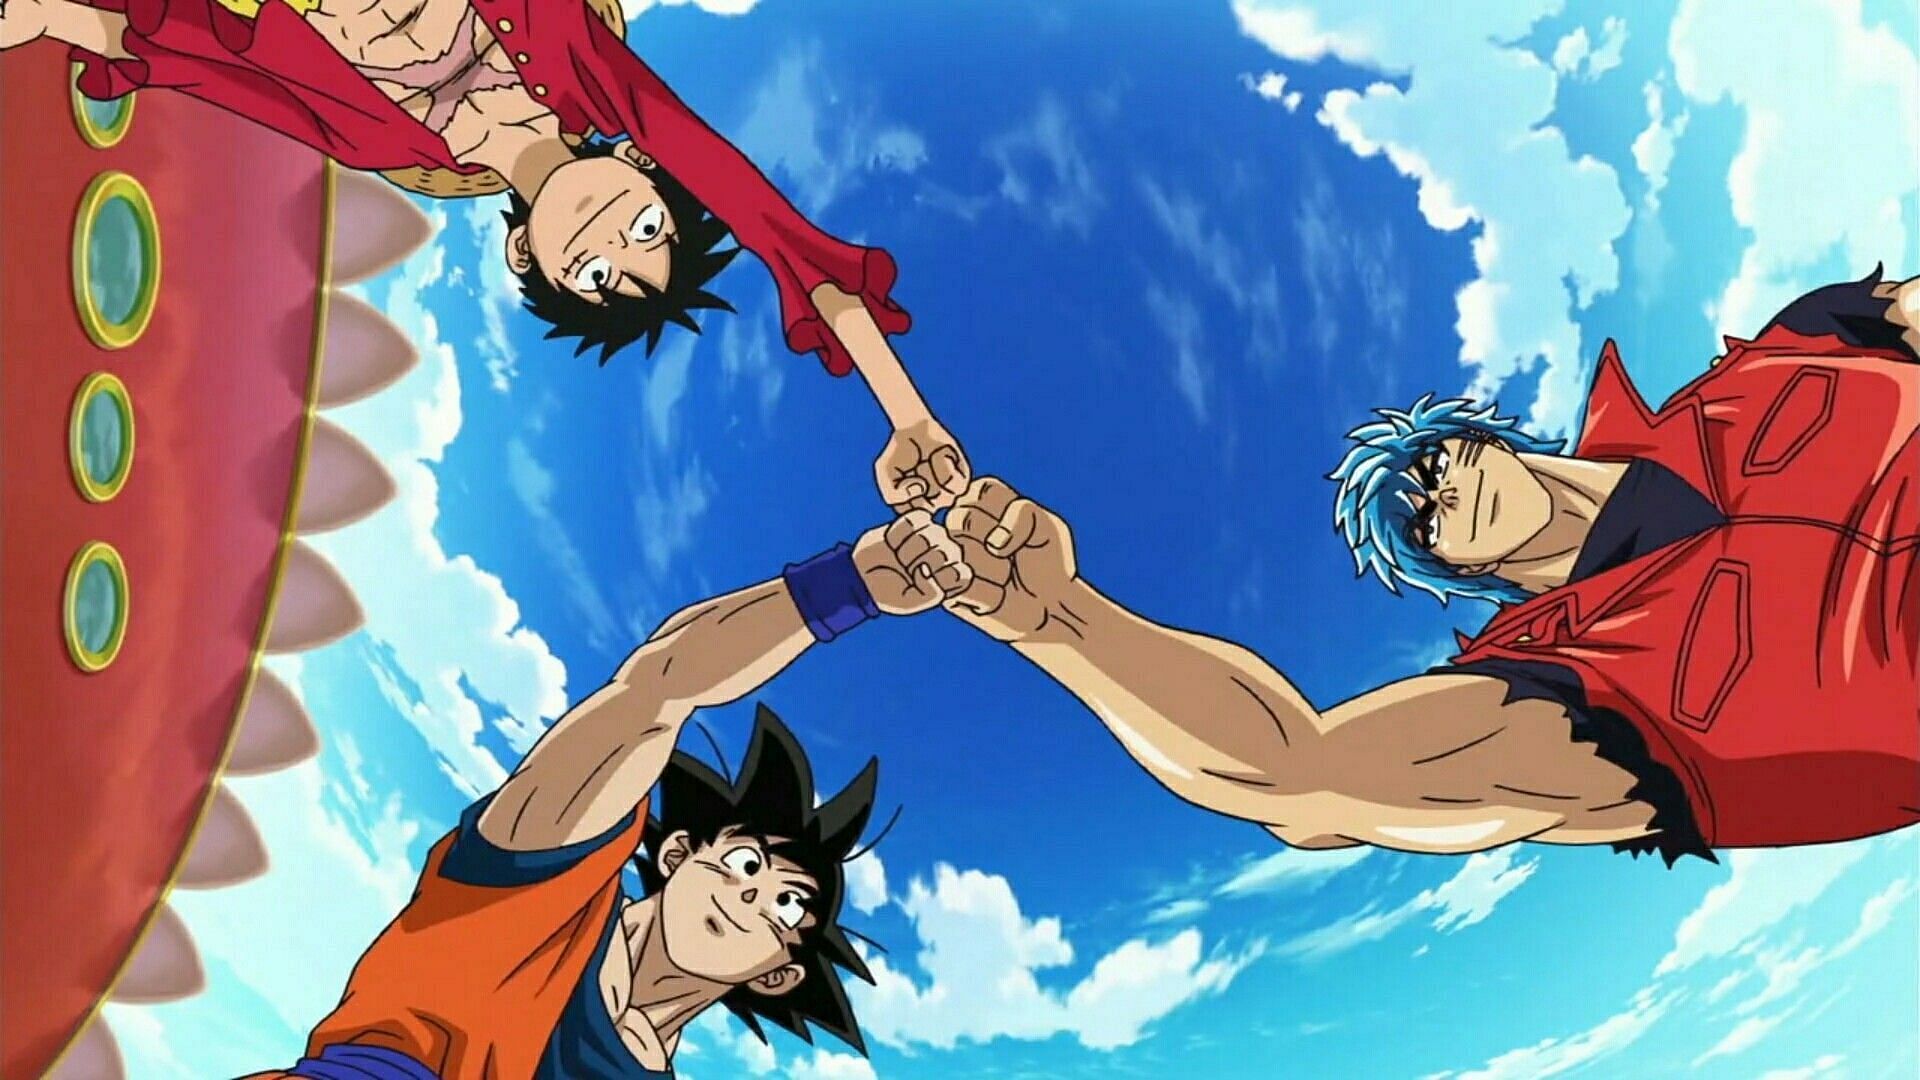 A still from the Dragon Ball, One Piece, and Toriko crossover special (Image via Toei Animation)